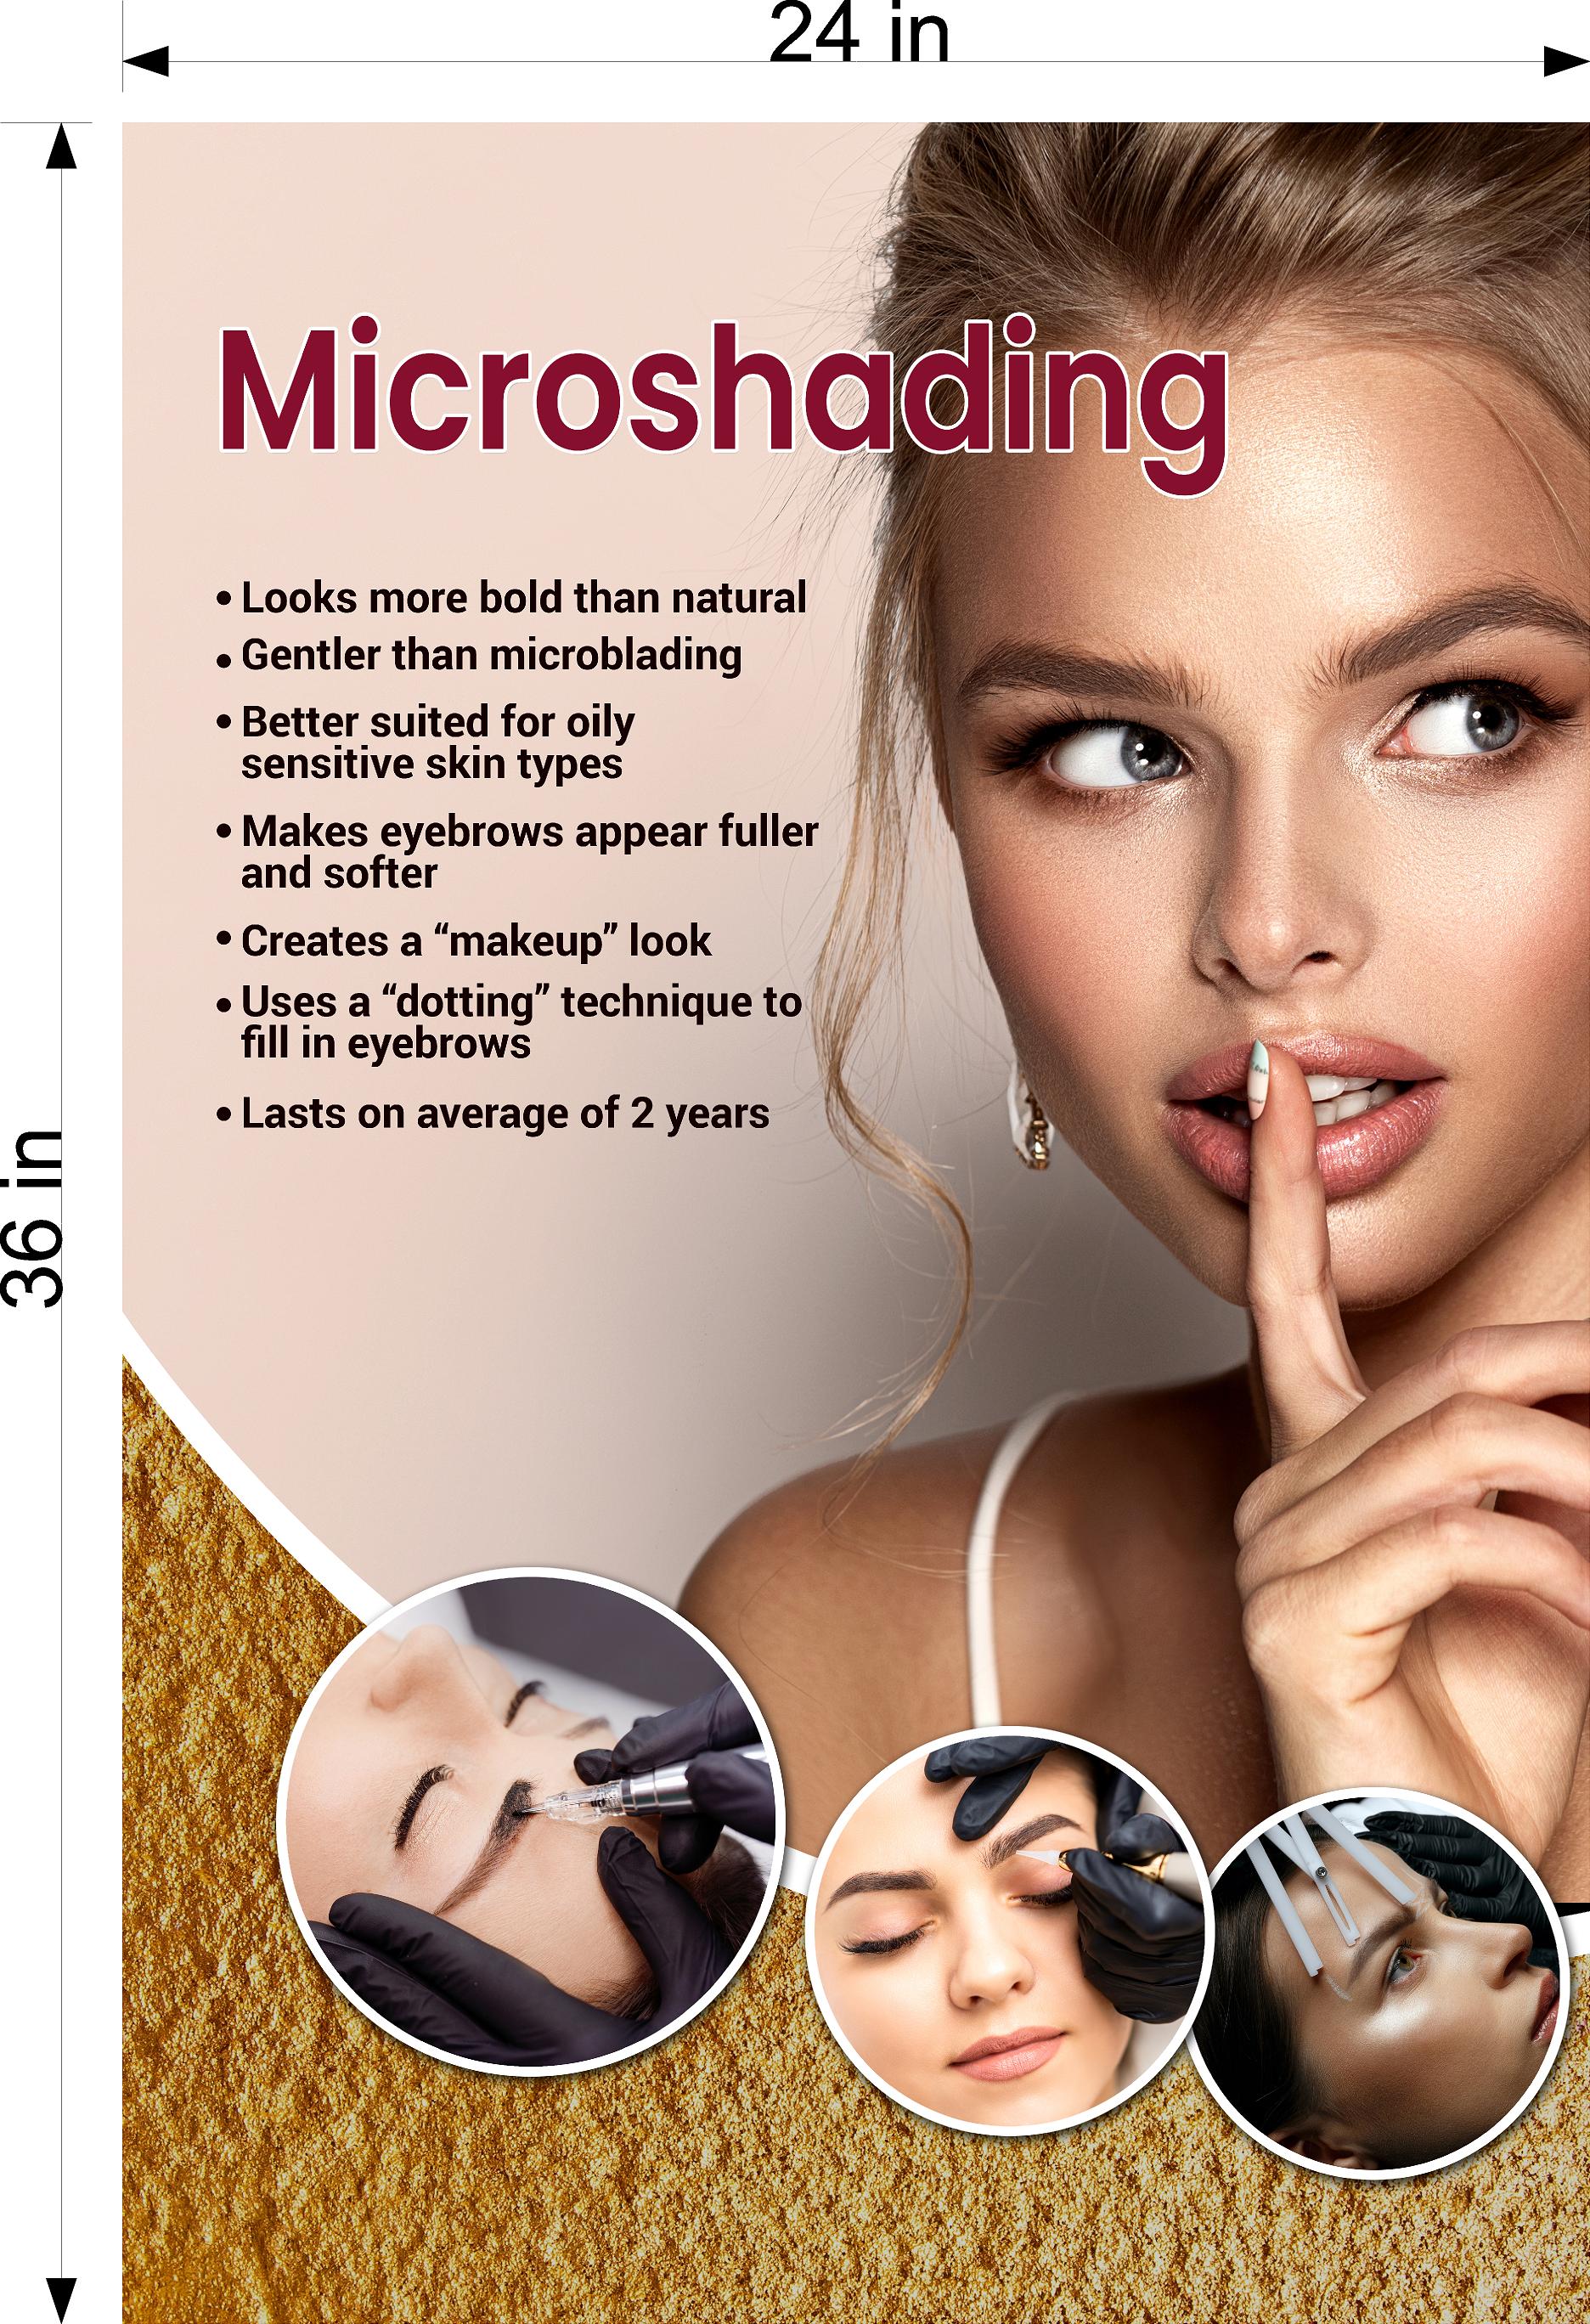 Microshading 05 Perforated Mesh One Way Vision See-Through Window Vinyl Salon Services Makeup Vertical